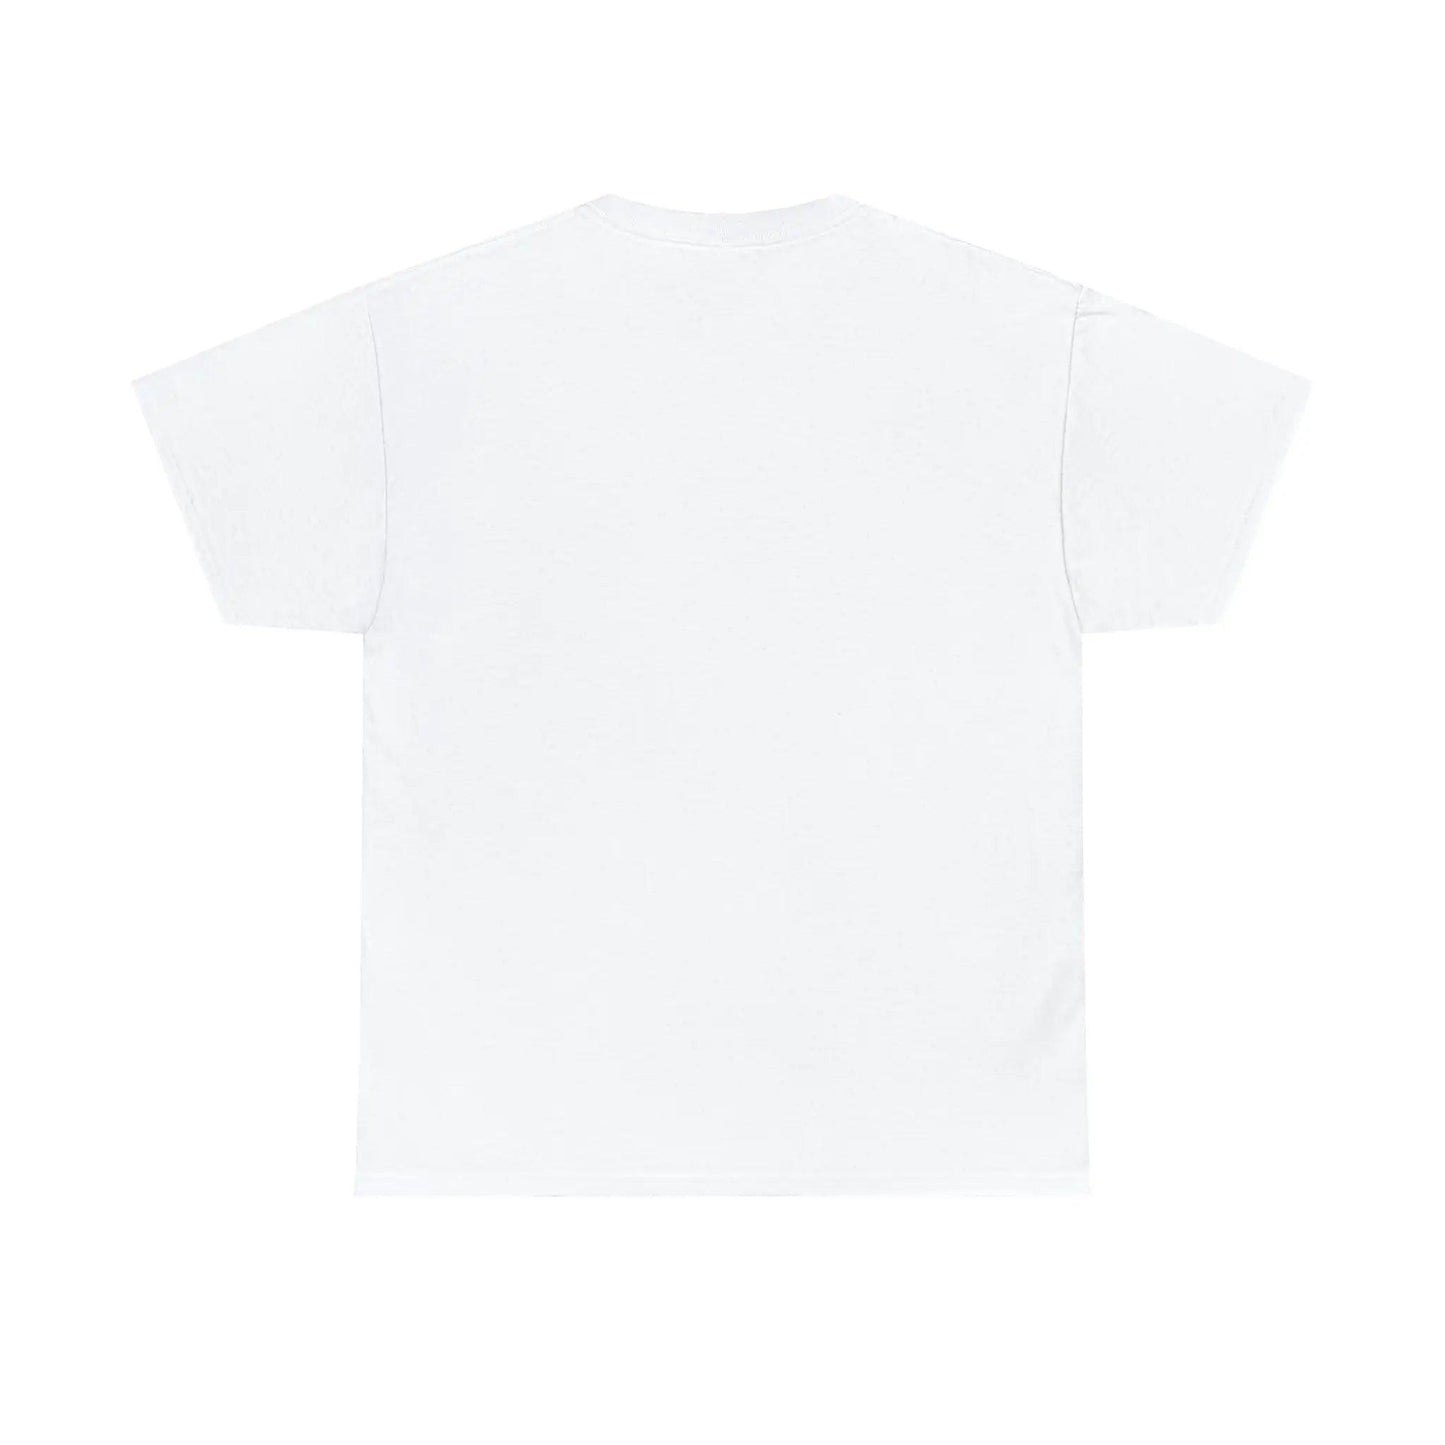 Pretty Good at Bad Decisions - Heavy Cotton Tee generic